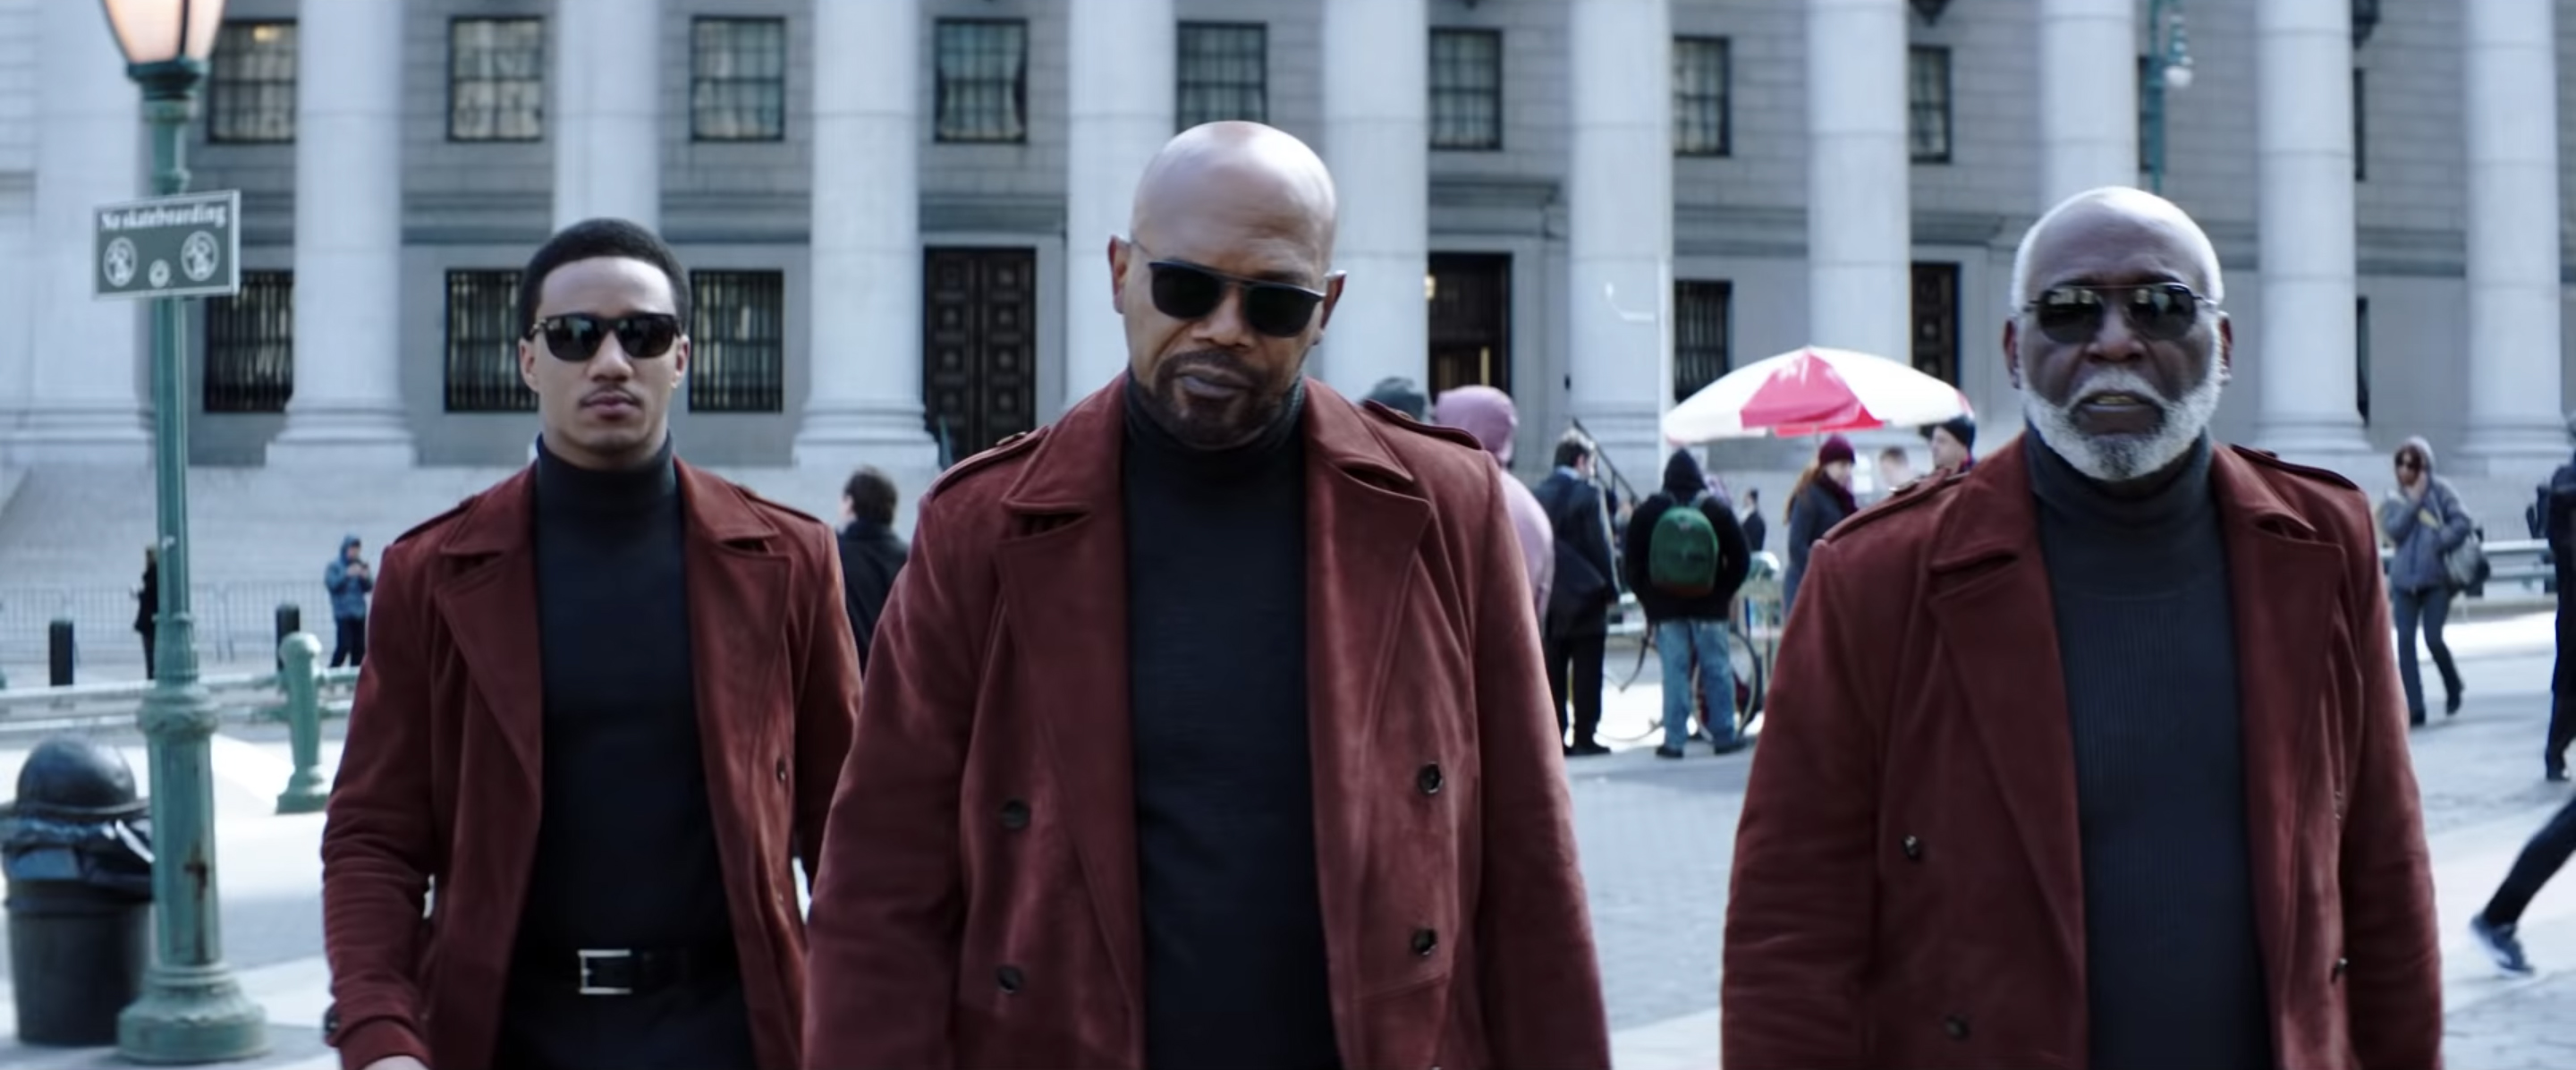 Shaft Trailer Brings Together Three Generations Of JusticeSeekers